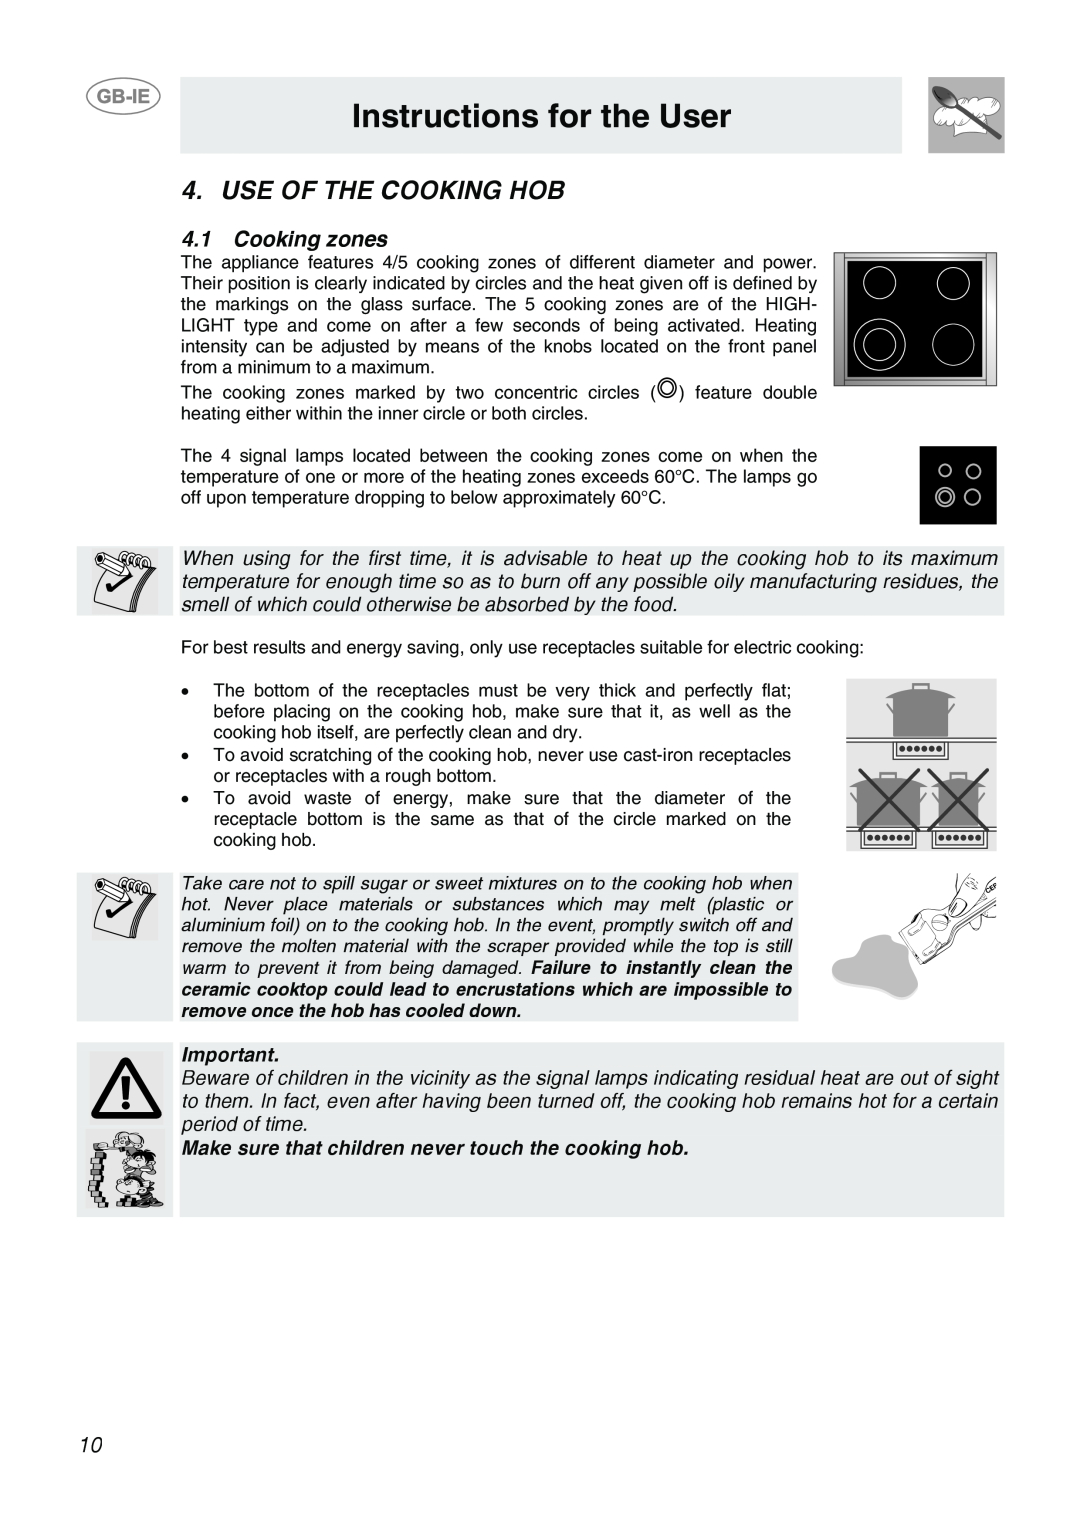 Smeg CB66CES1 manual Use Of The Cooking Hob, Cooking zones, Instructions for the User 